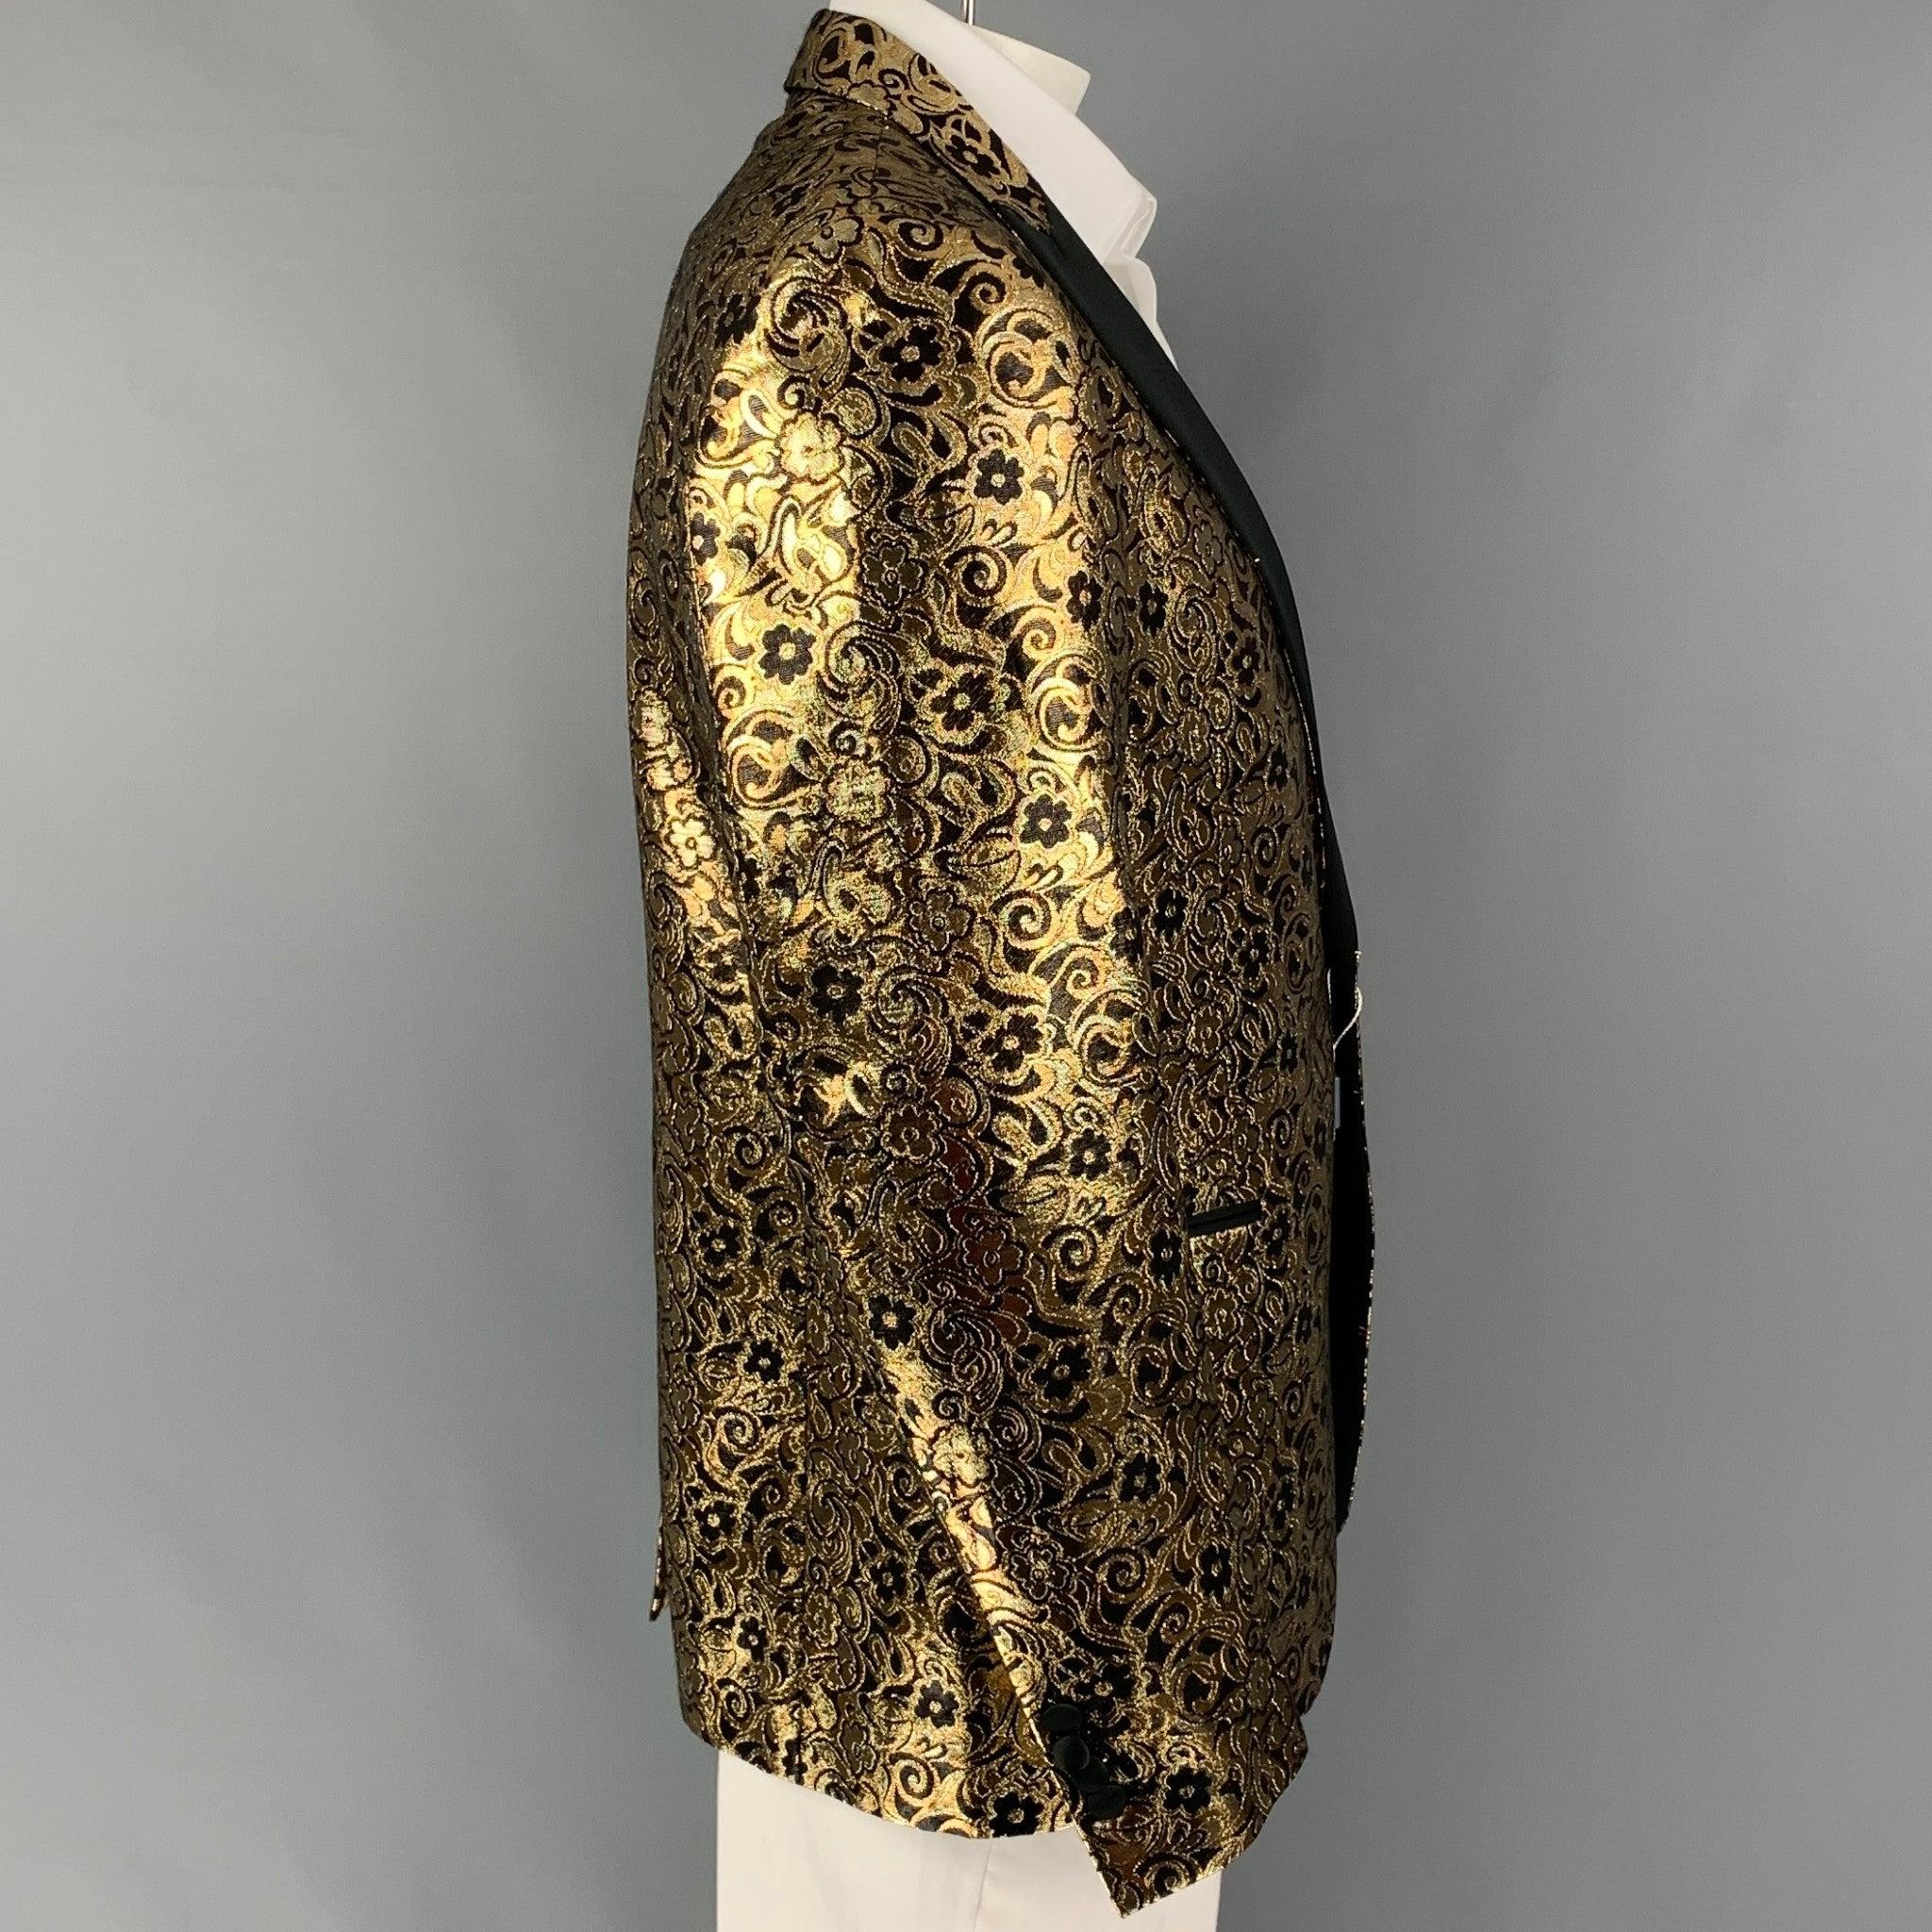 MICHAEL KORS sport coat comes in a black & gold jacquard polyester with a full liner featuring a peak lapel, slit pockets, single back vent, and a single button closure. Made in Italy.
New With Tags.
 

Marked:   46/56 R  

Measurements: 
